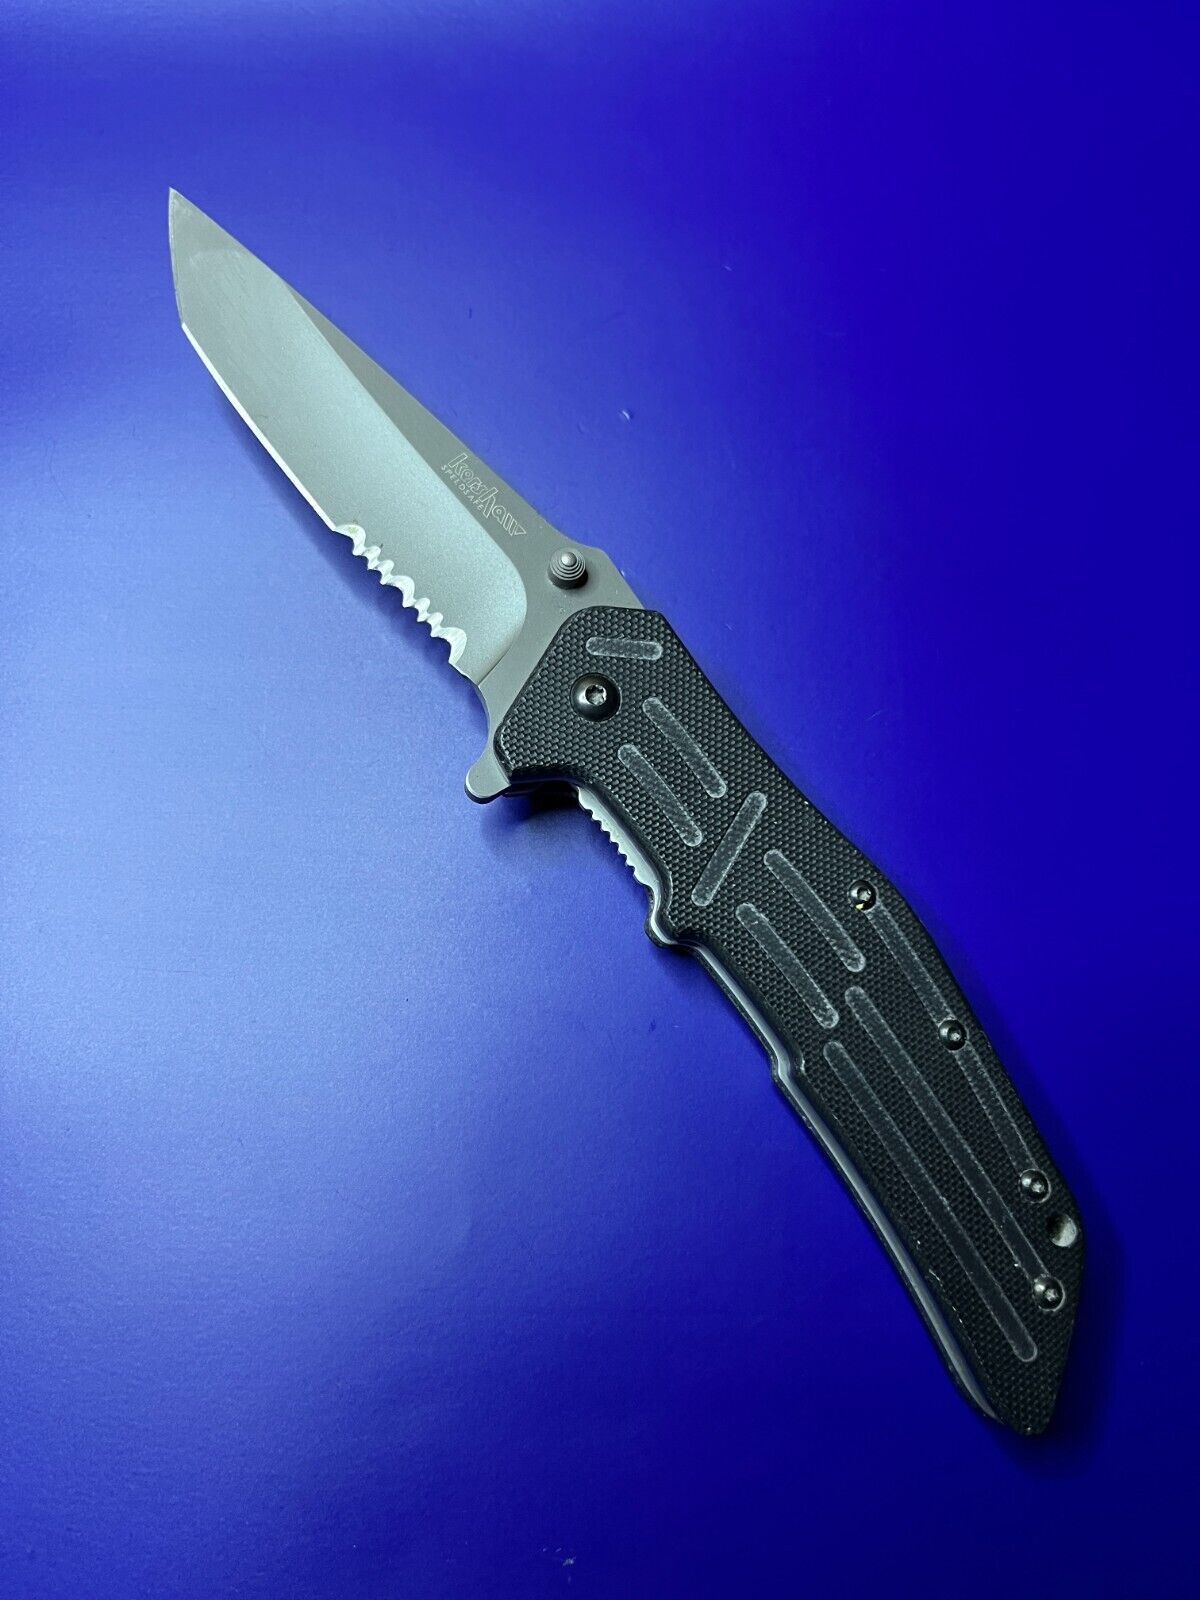 Kershaw 1985ST Assisted Open Knife Liner Lock Combo Edge Tanto Blade